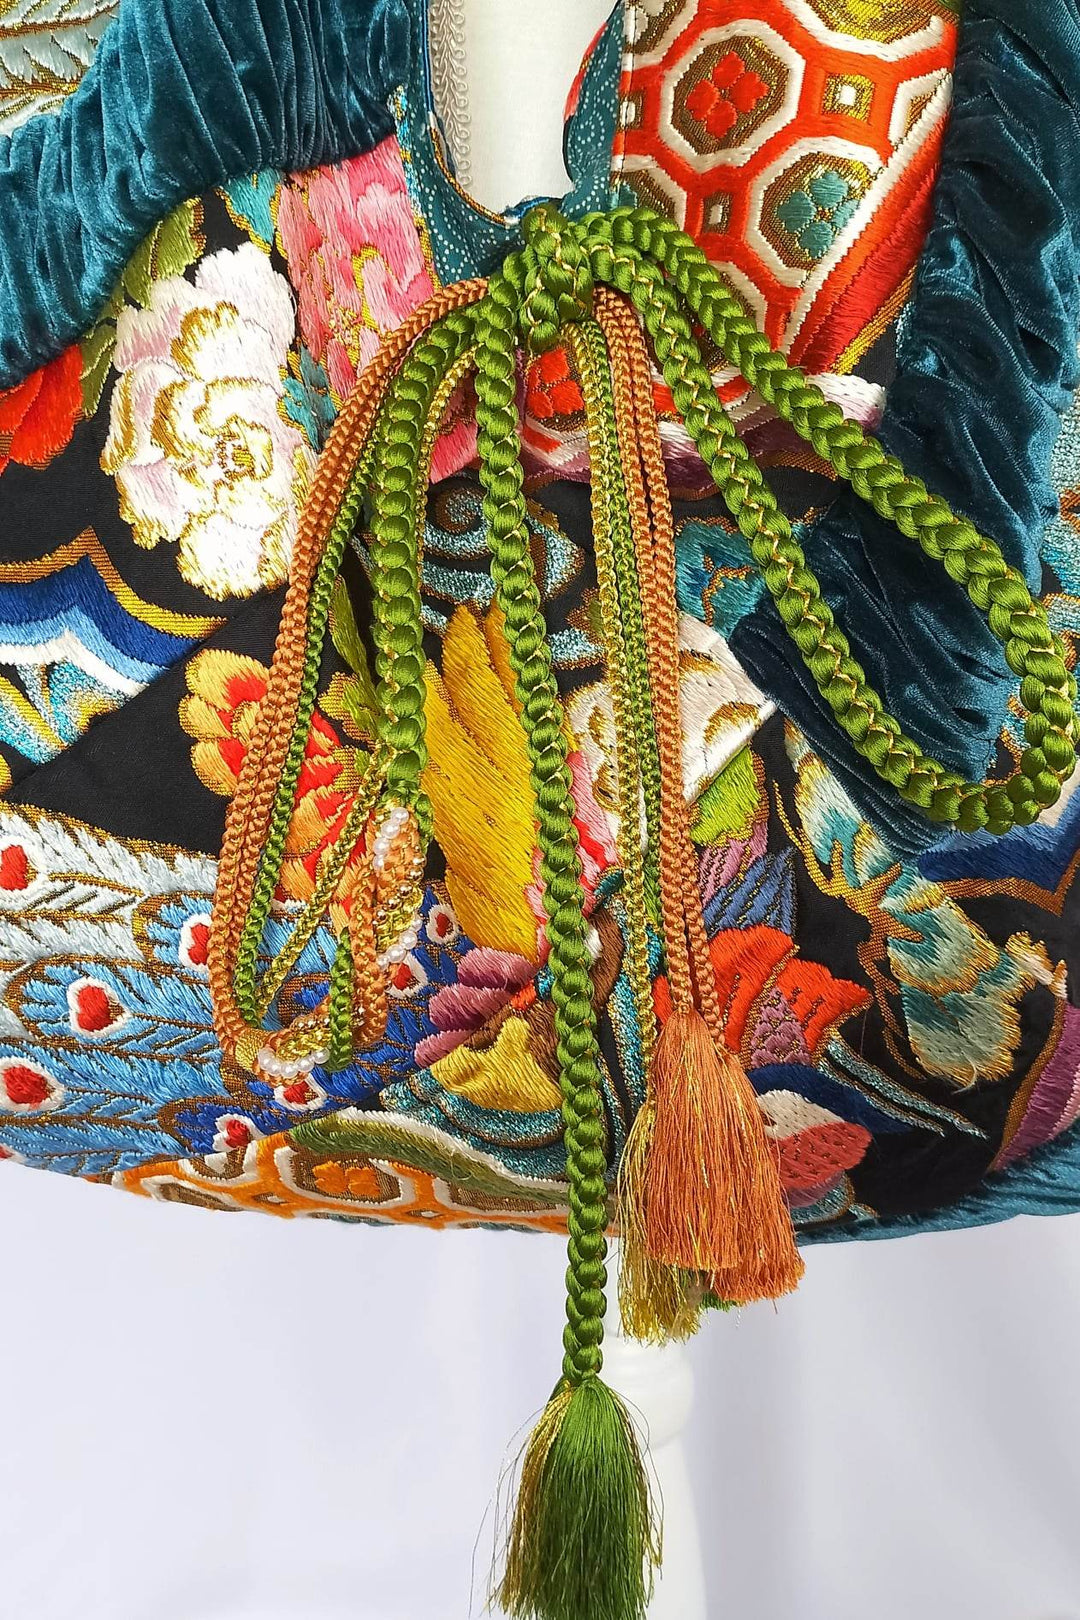 a stunning embroidered boho bag, showcasing the intricate details on this large tote bag. This large boho bag elevates anyones style and is an example of embroidered tote bag styling.